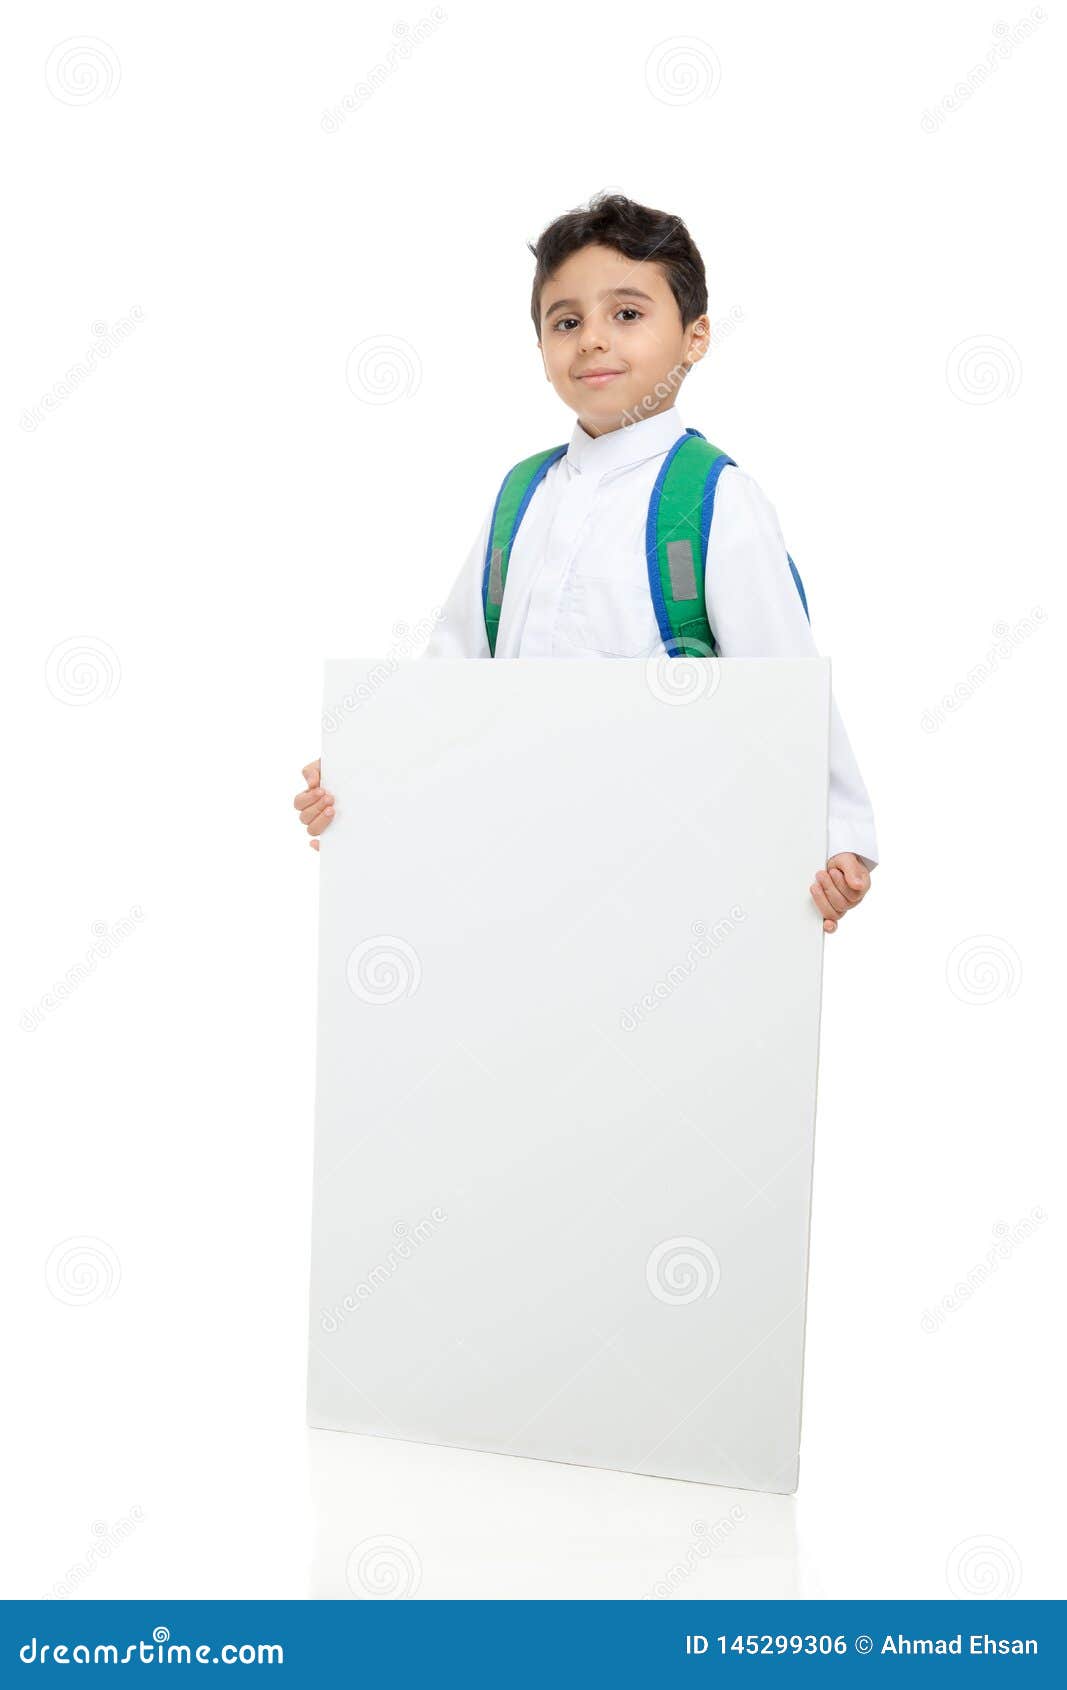 arab school boy holding a big white board with both hands, wearing white traditional saudi thobe and sneakers, raising his hands